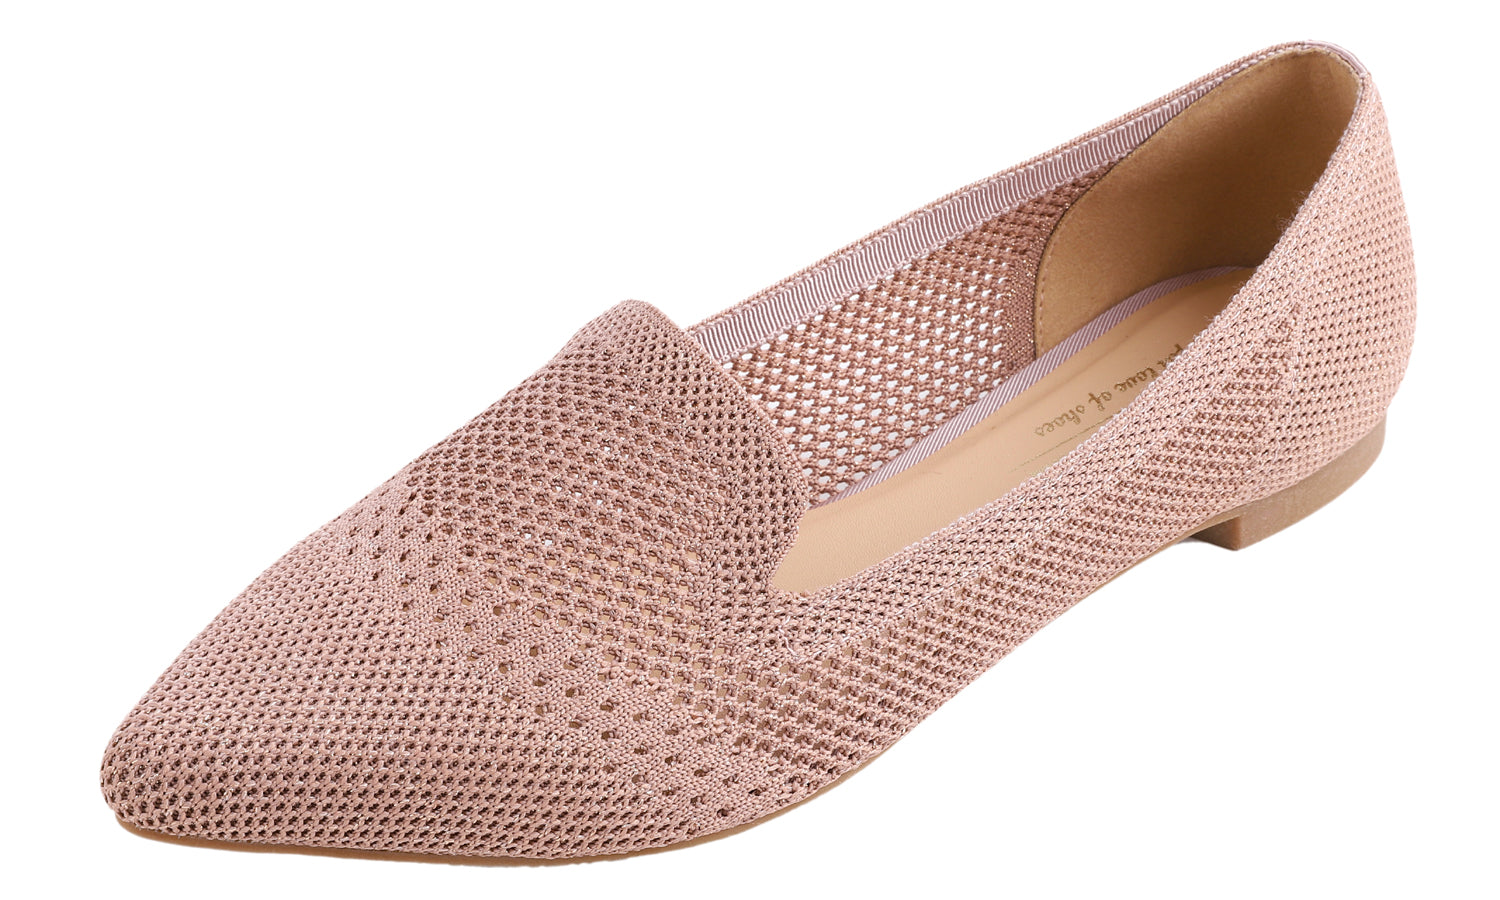 Feversole Women's Woven Fashion Breathable Knit Flat Shoes Pointed Loafer Rose Gold